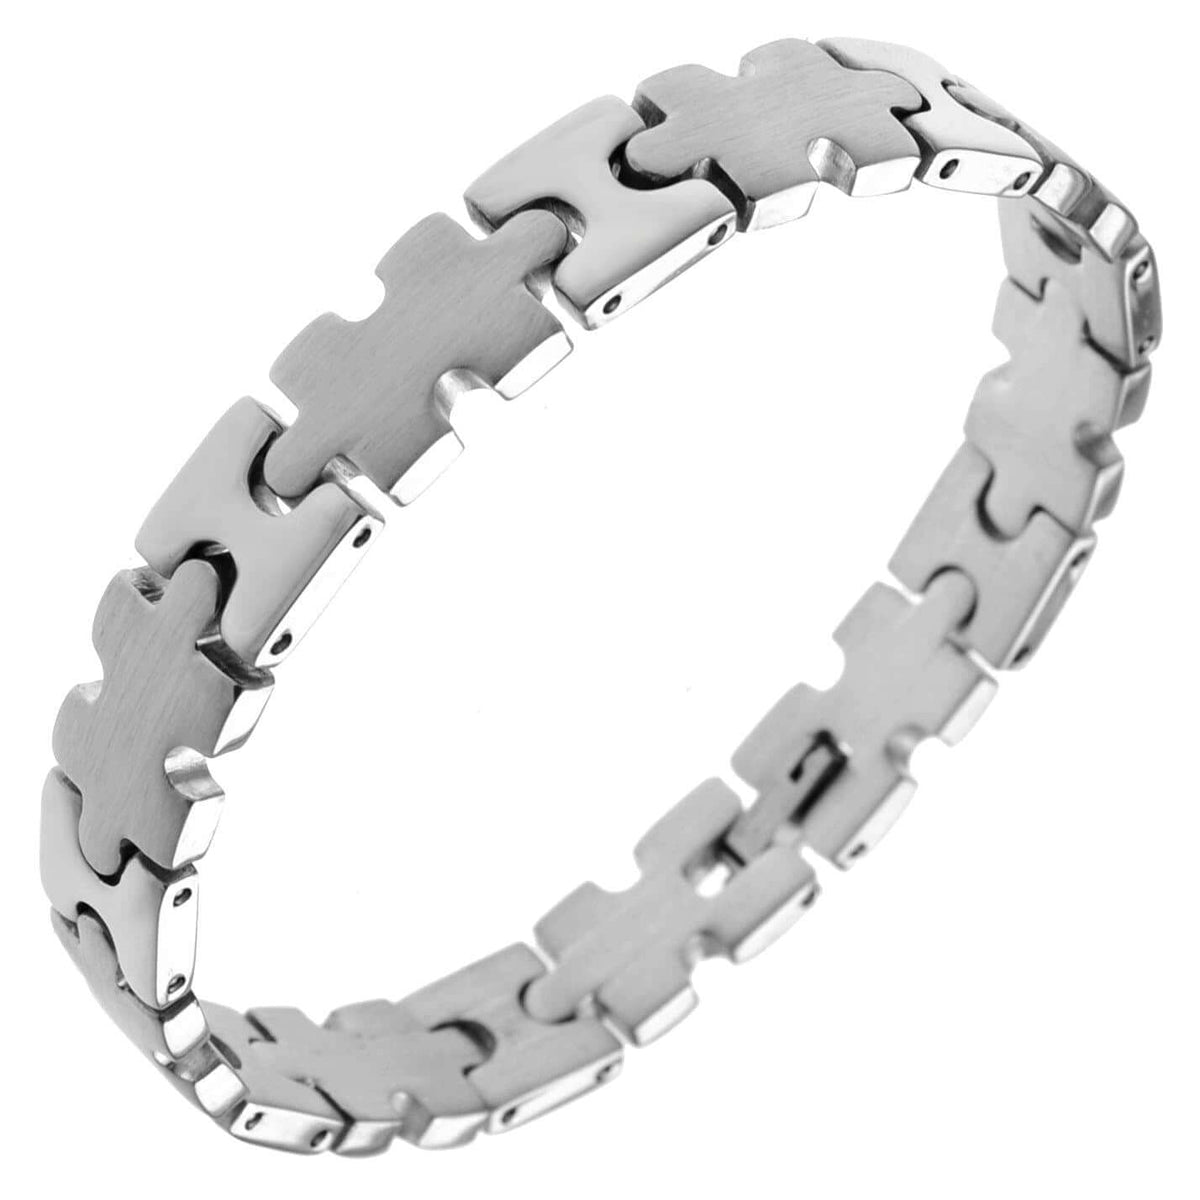 Autism Awareness Stainless Steel Puzzle Bracelet - The House of Awareness